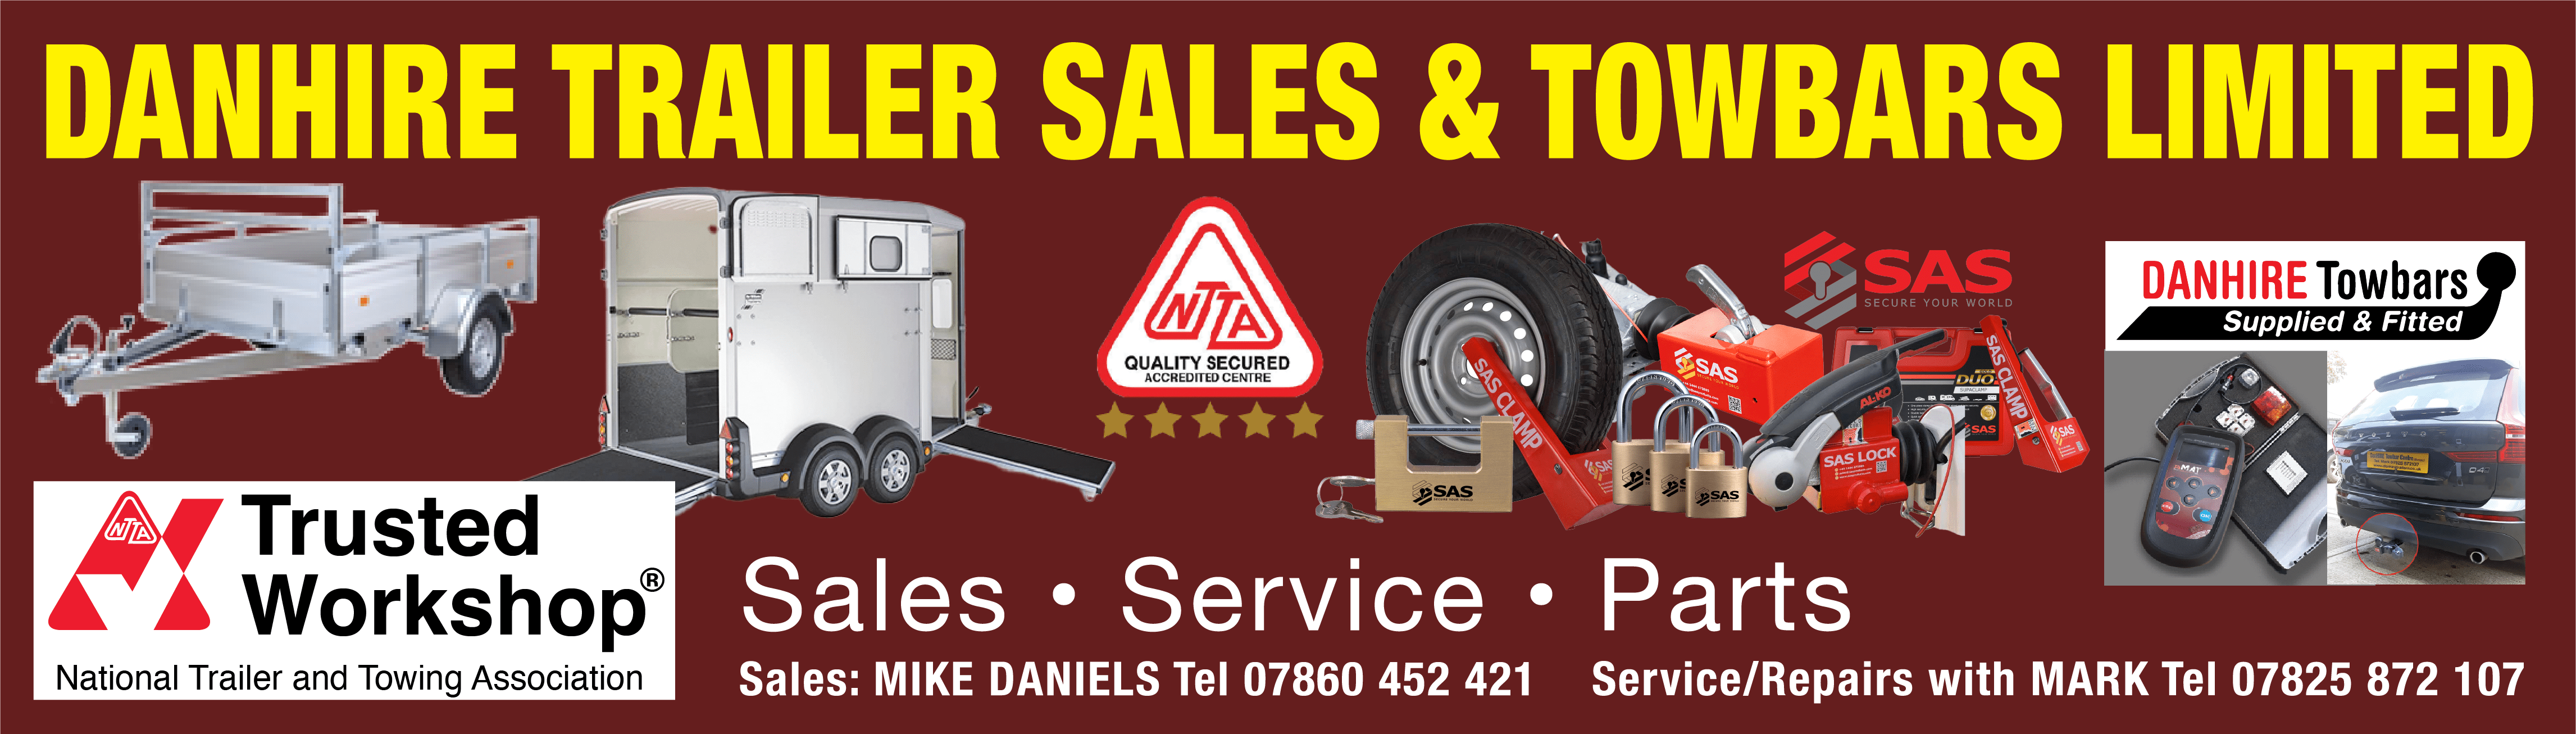 DANHIRE TRAILER SALES & TOWBARS LIMITED | Trailer Sales, Servicing, Tow Bars Fitted, ERDÉ, DAXARA